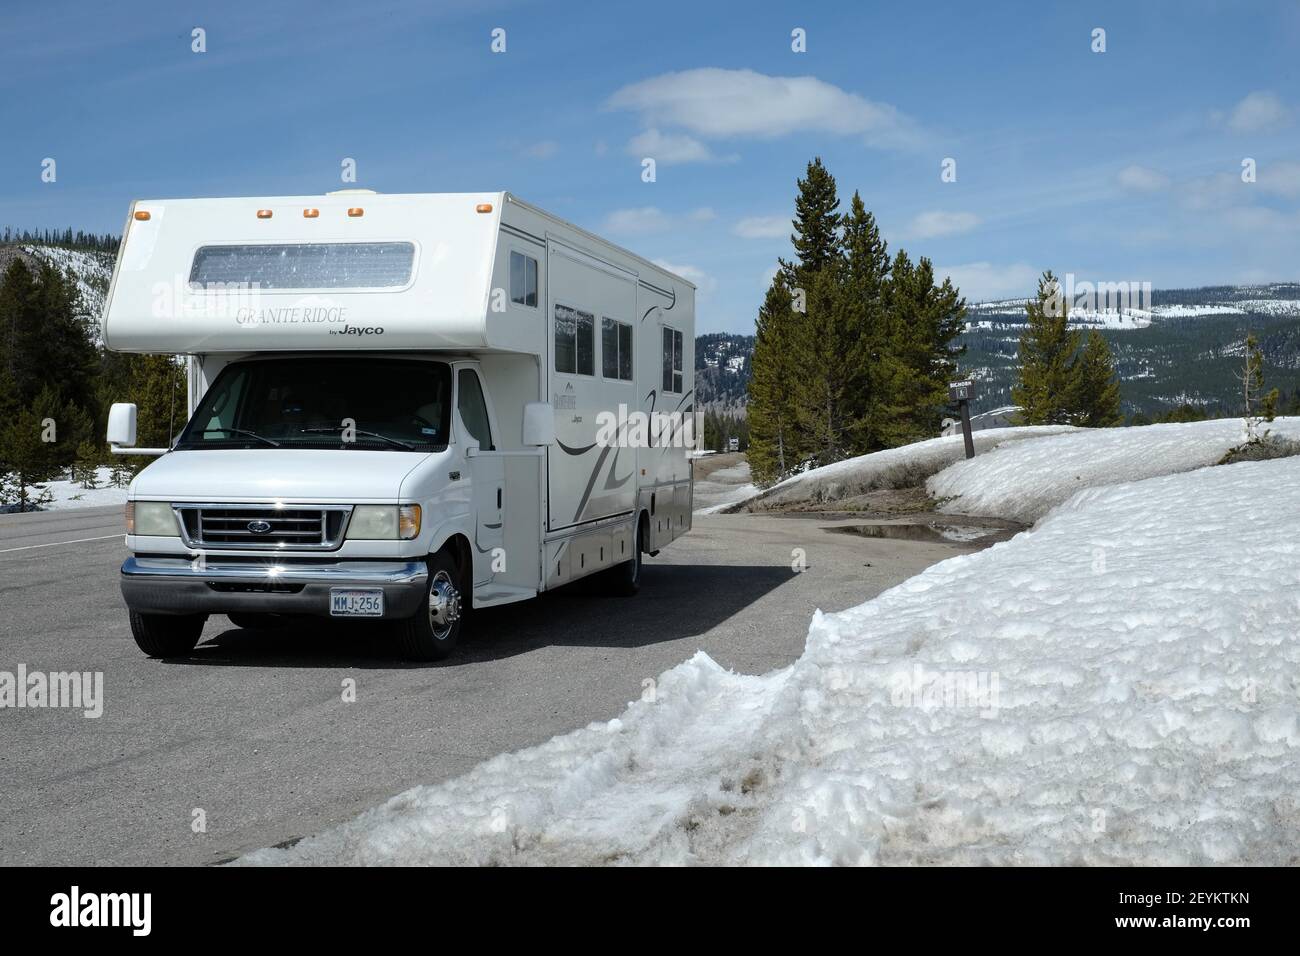 Wyoming Motorhome Banque D'Images